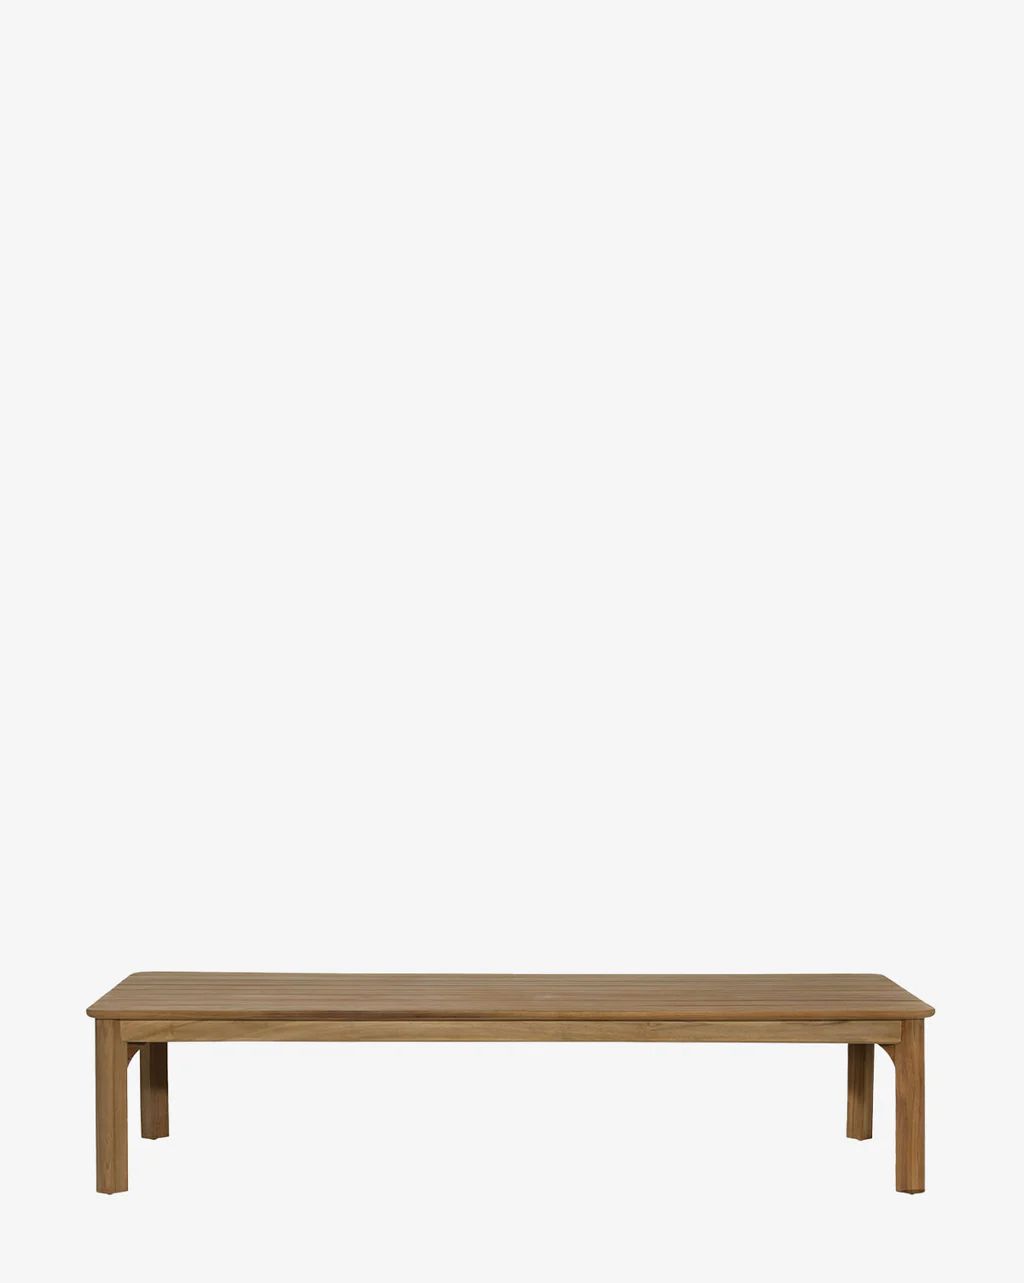 Ellery Coffee Table | McGee & Co.